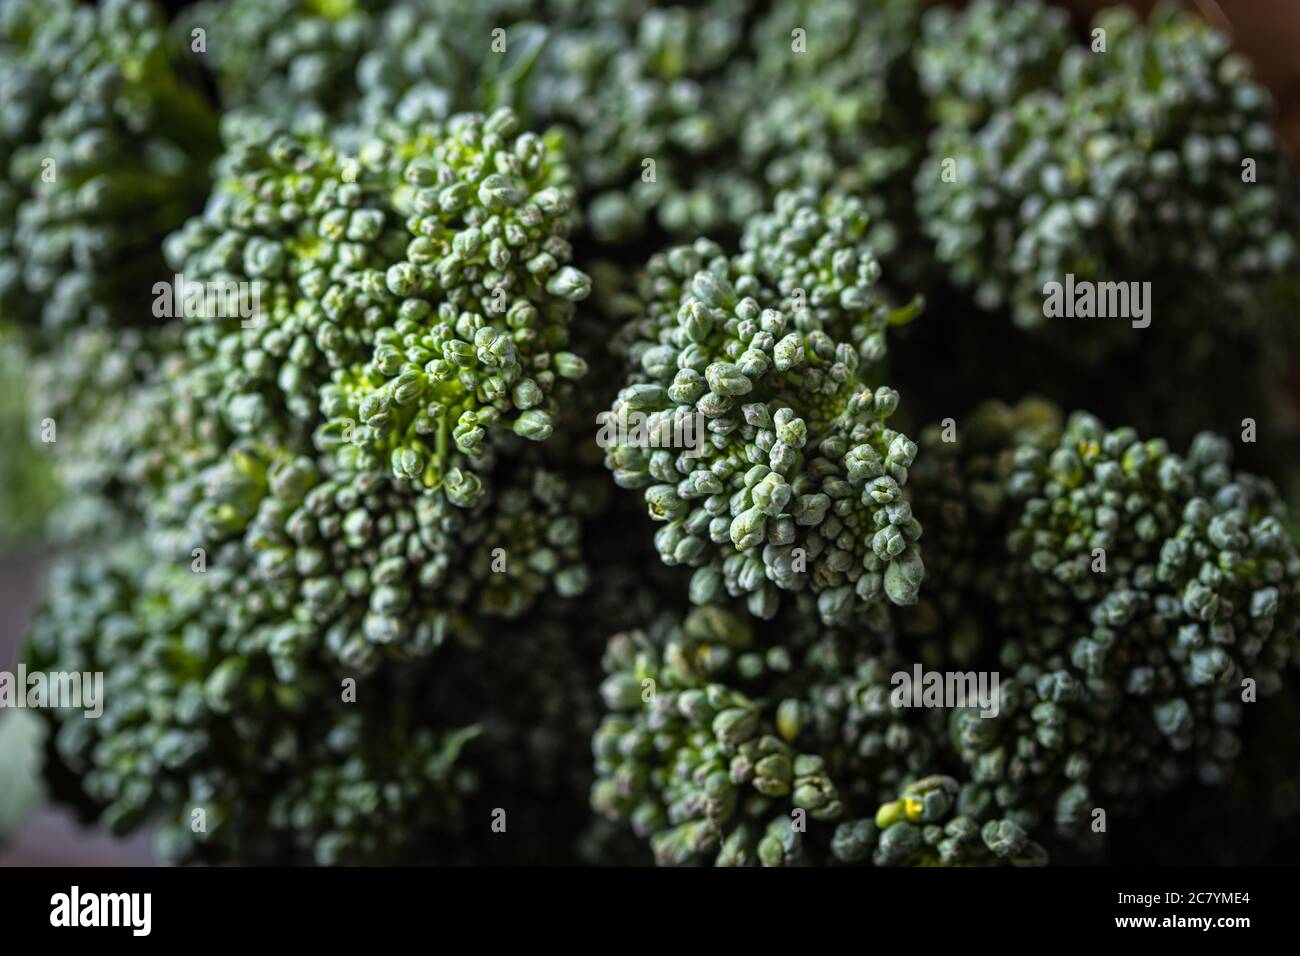 Bunch of broccolini. Close up view. Stock Photo